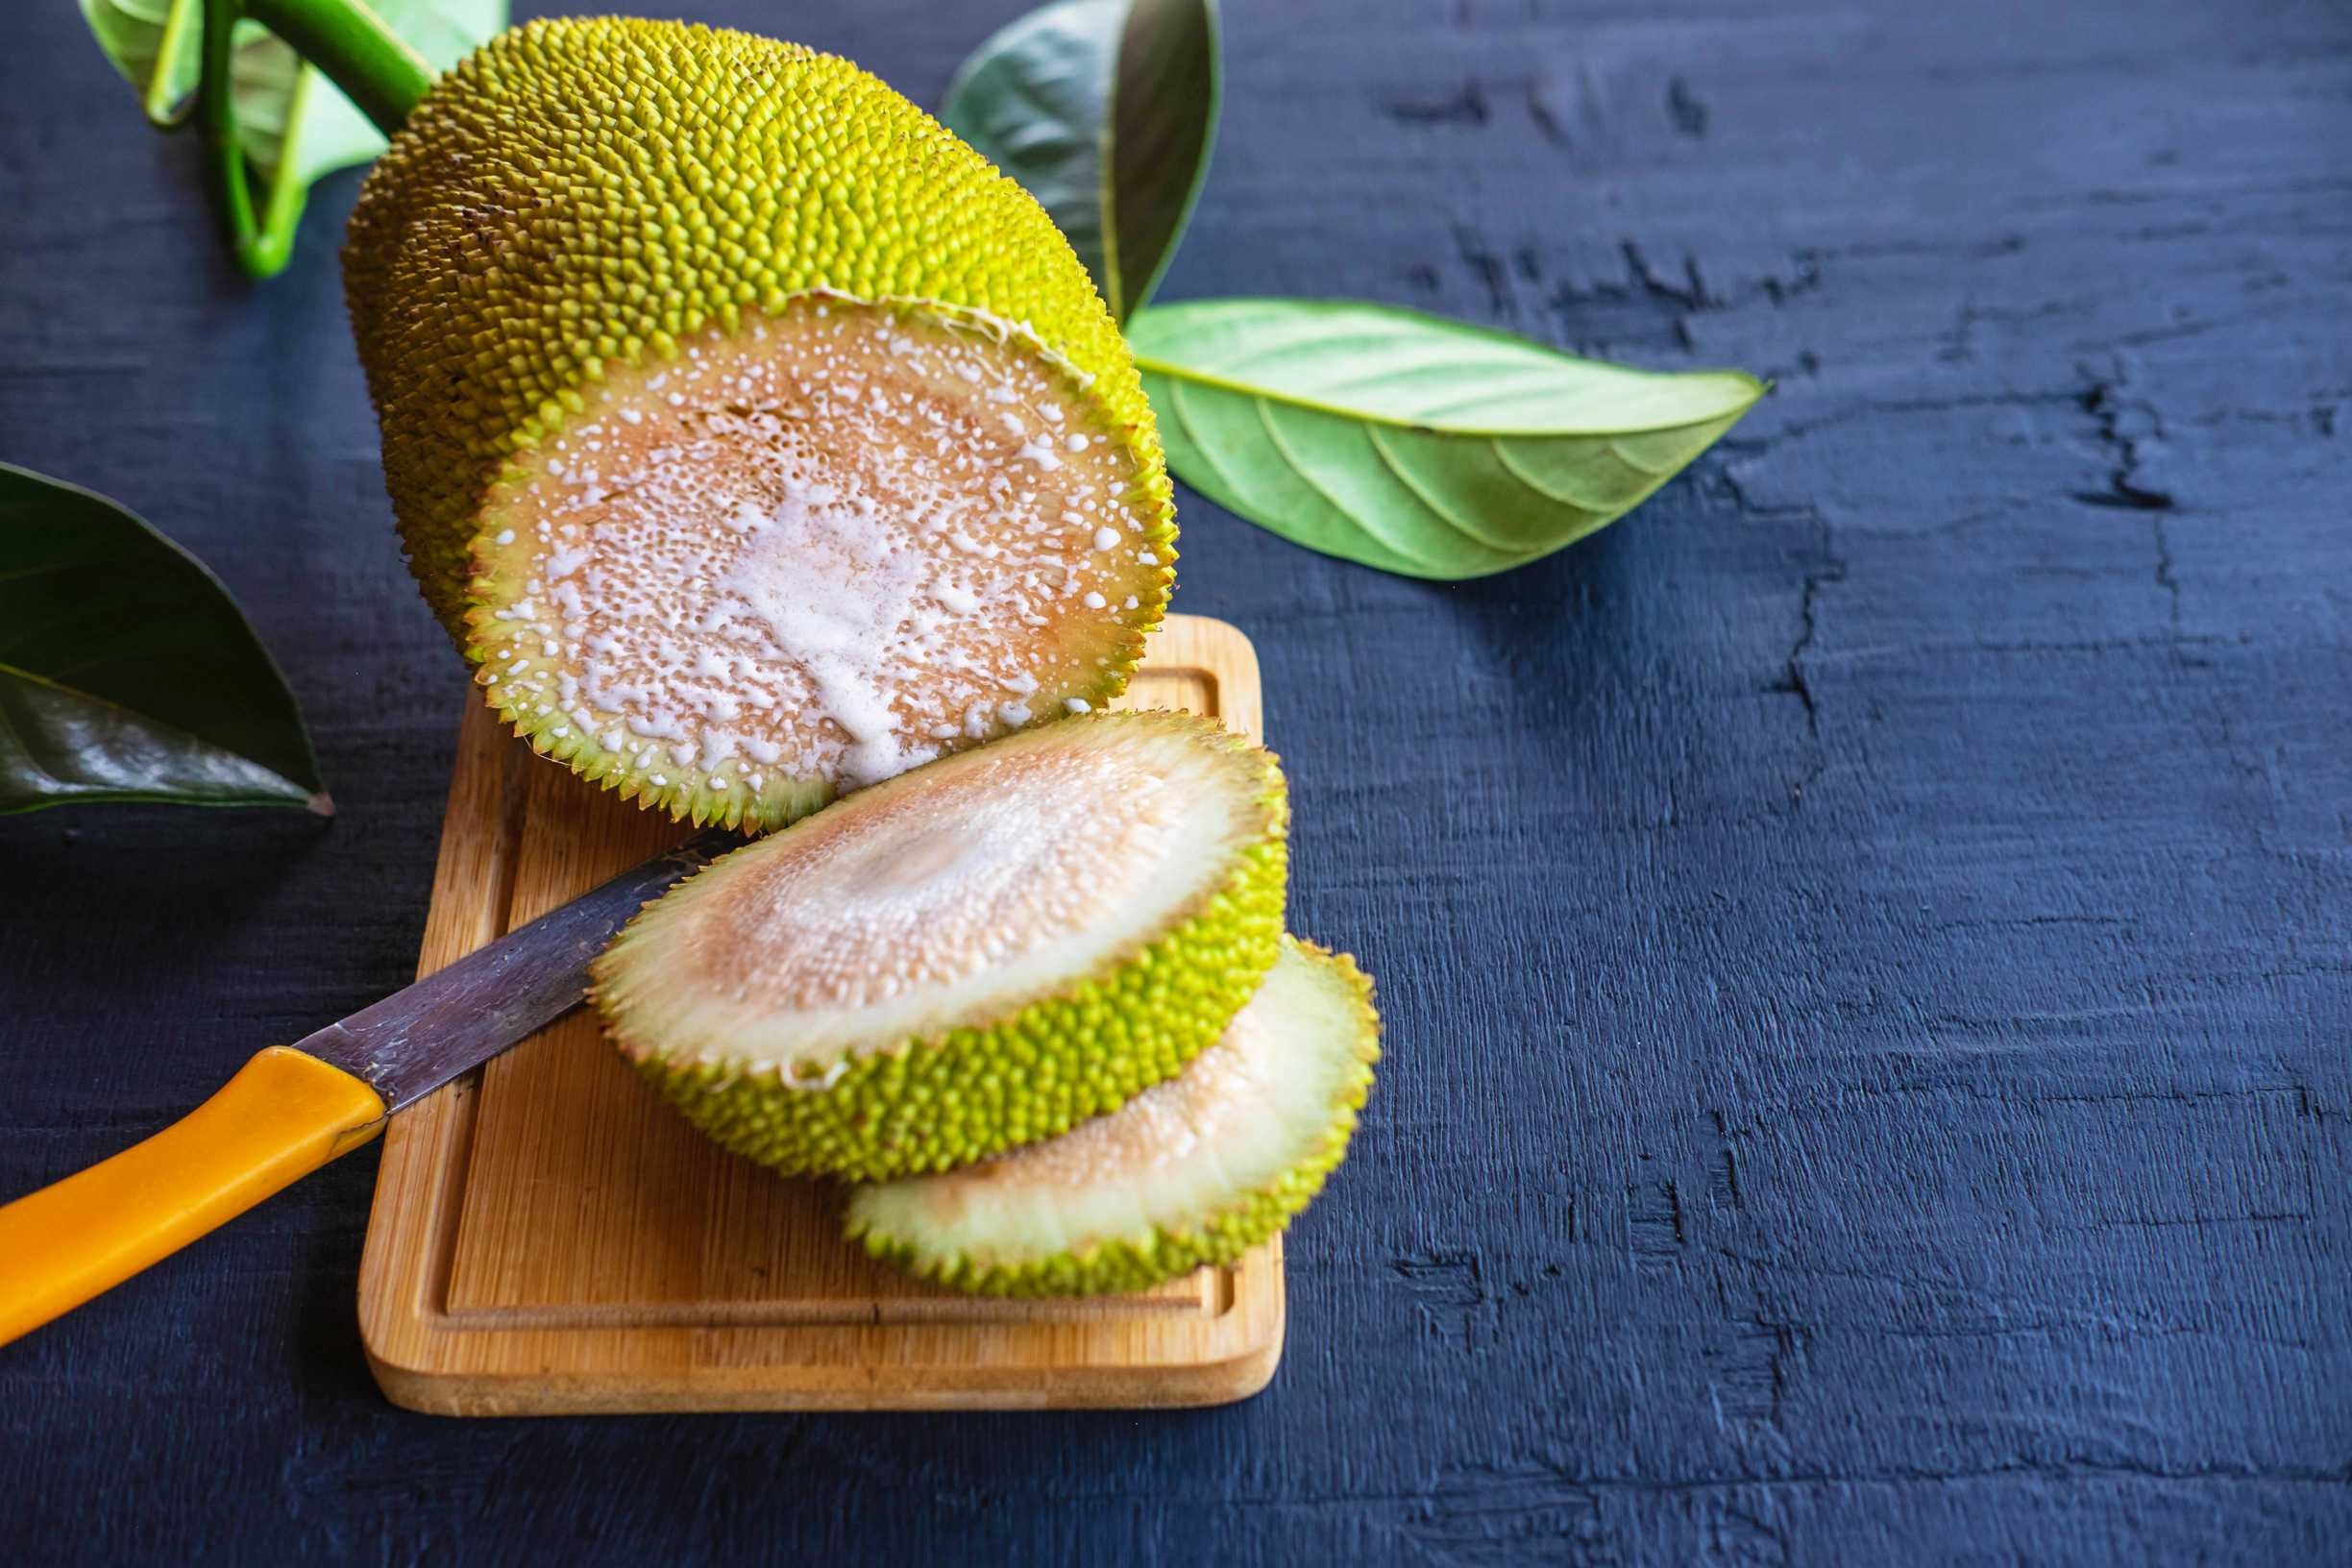 microsoft, ask a nutrition professional: why is jackfruit good for diabetes?